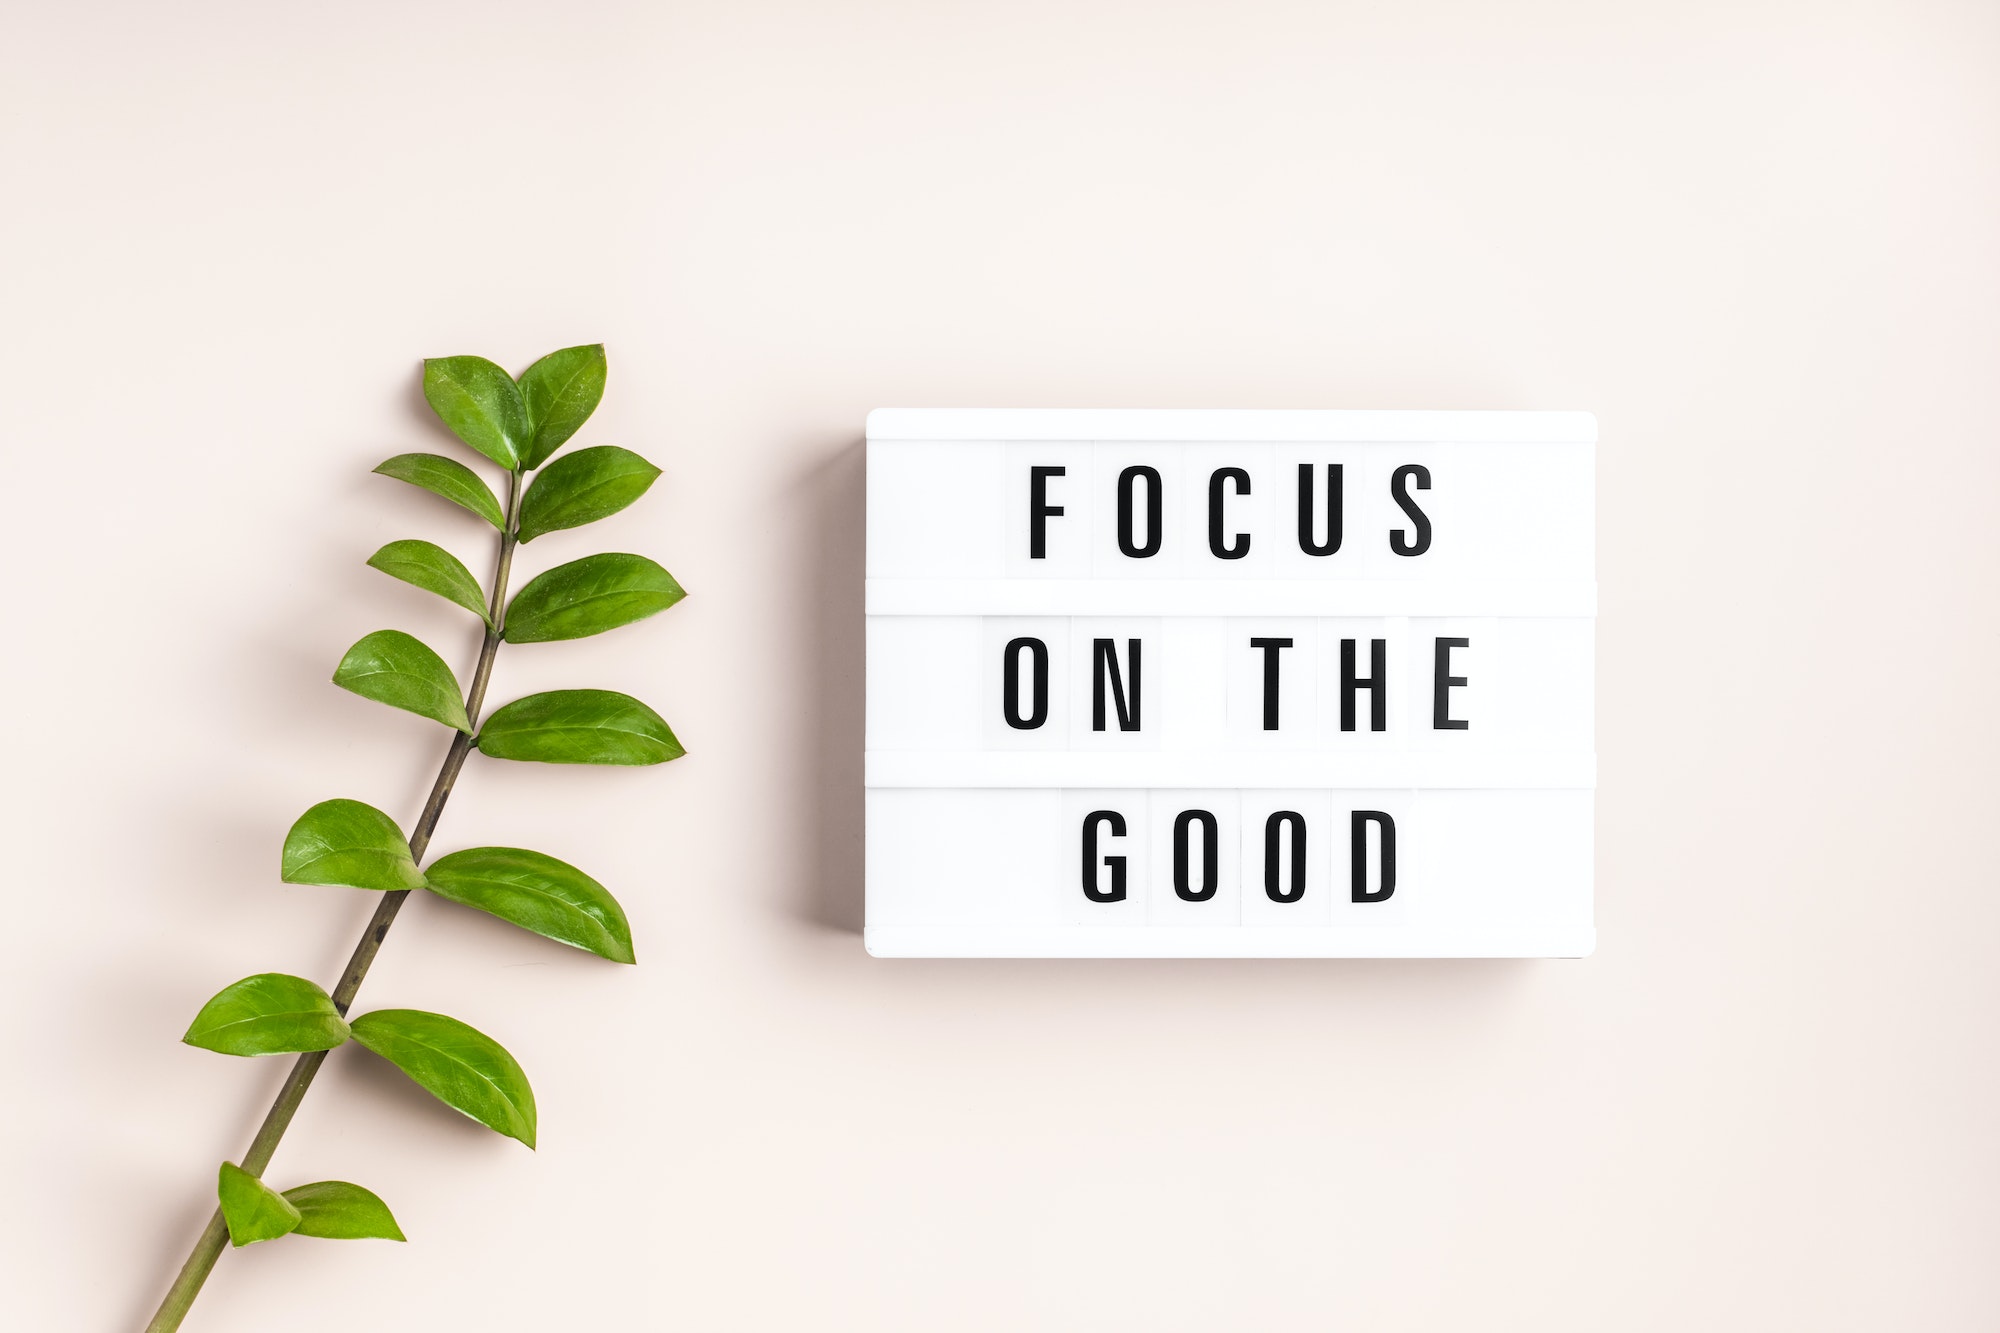 Lightbox with text focus on the good. Mental health, positive thinking idea